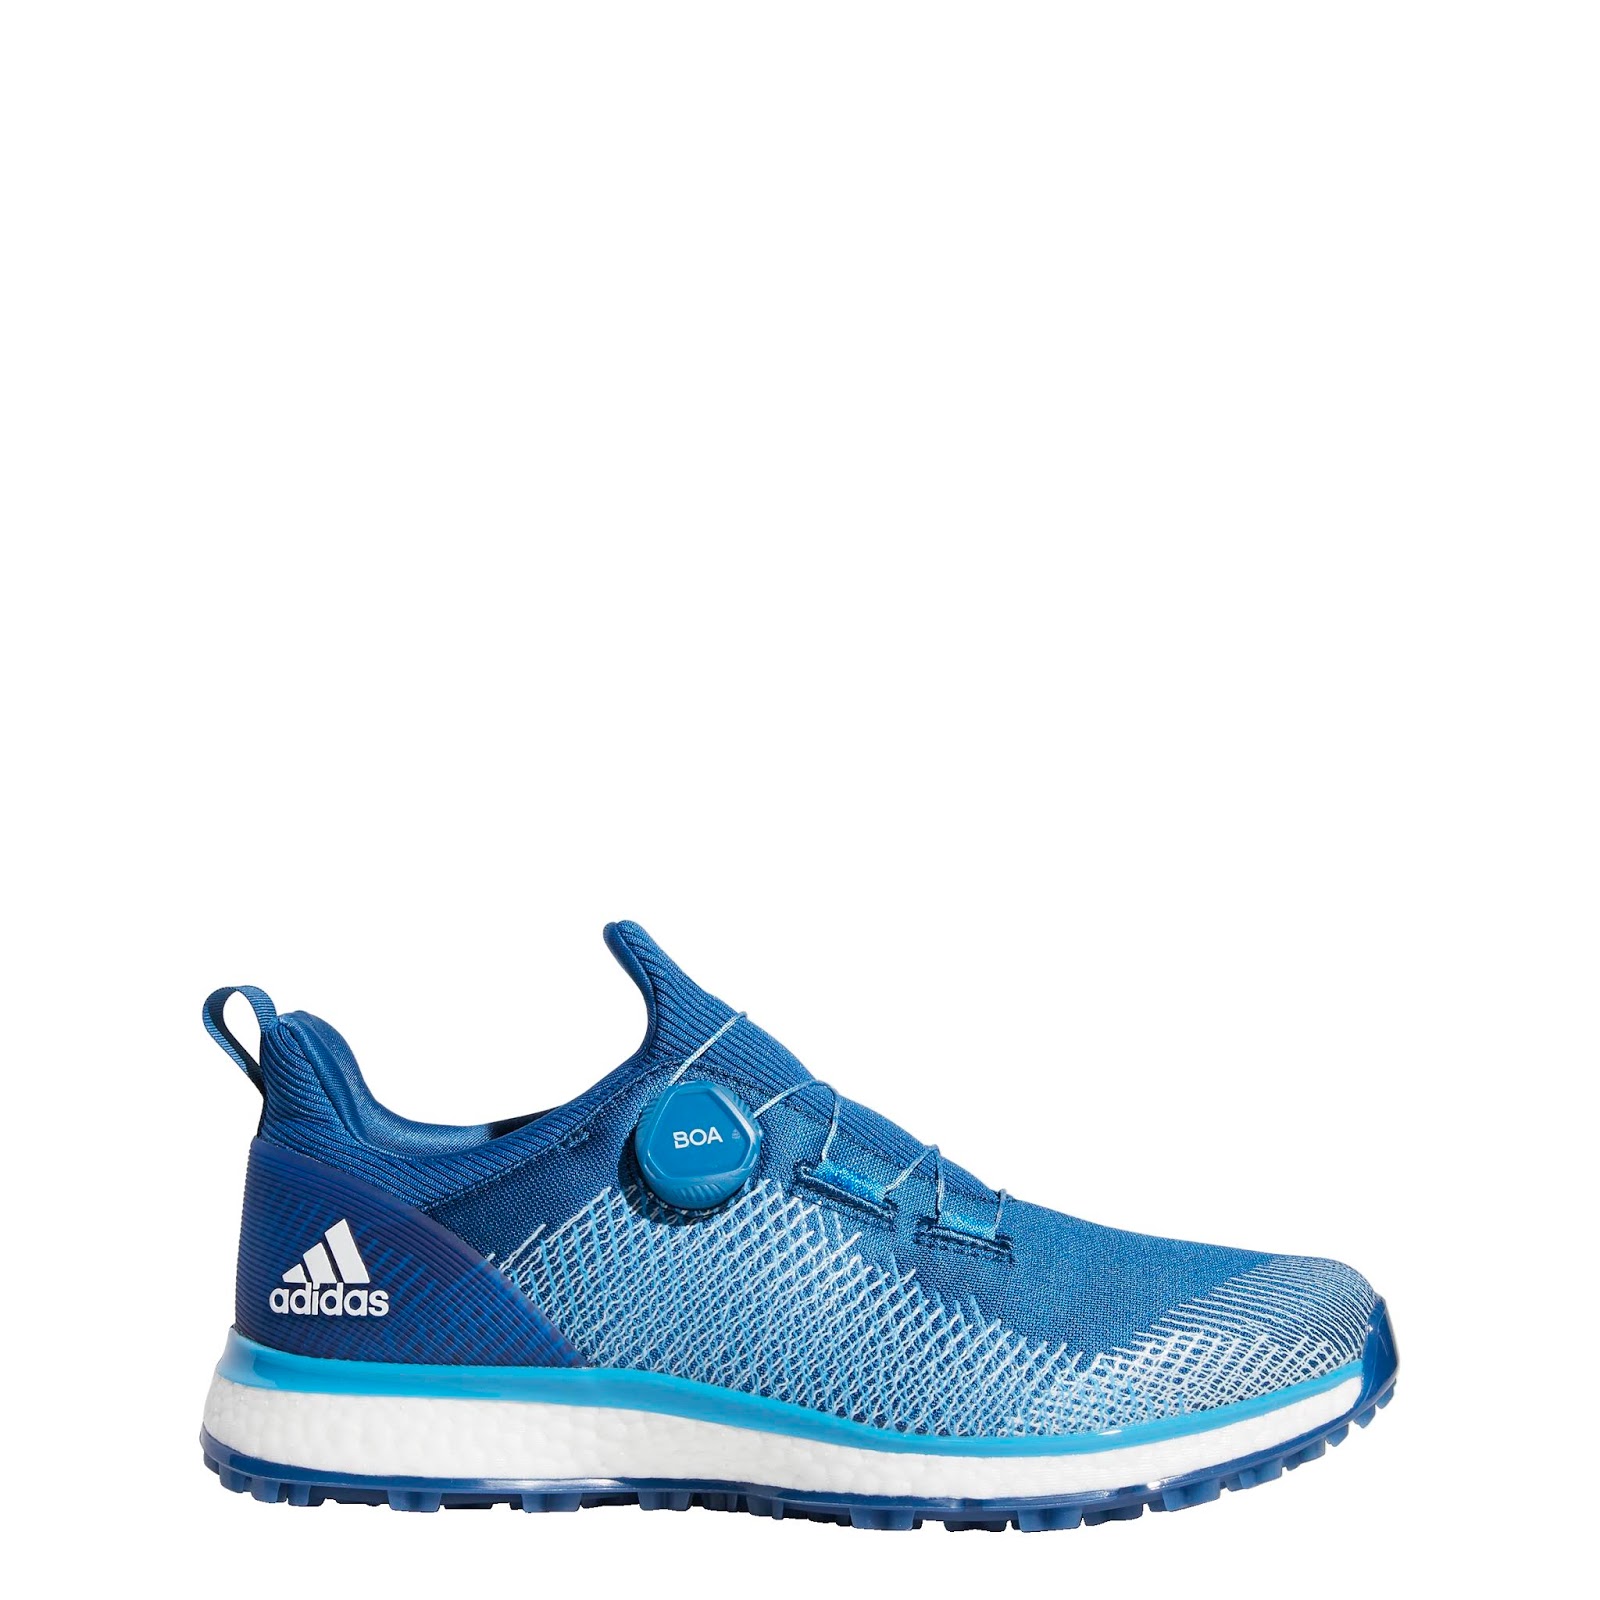 The #1 Writer in Golf: Adidas 2019 Forgefiber BOA Golf Shoes Preview: Fit with a Twist